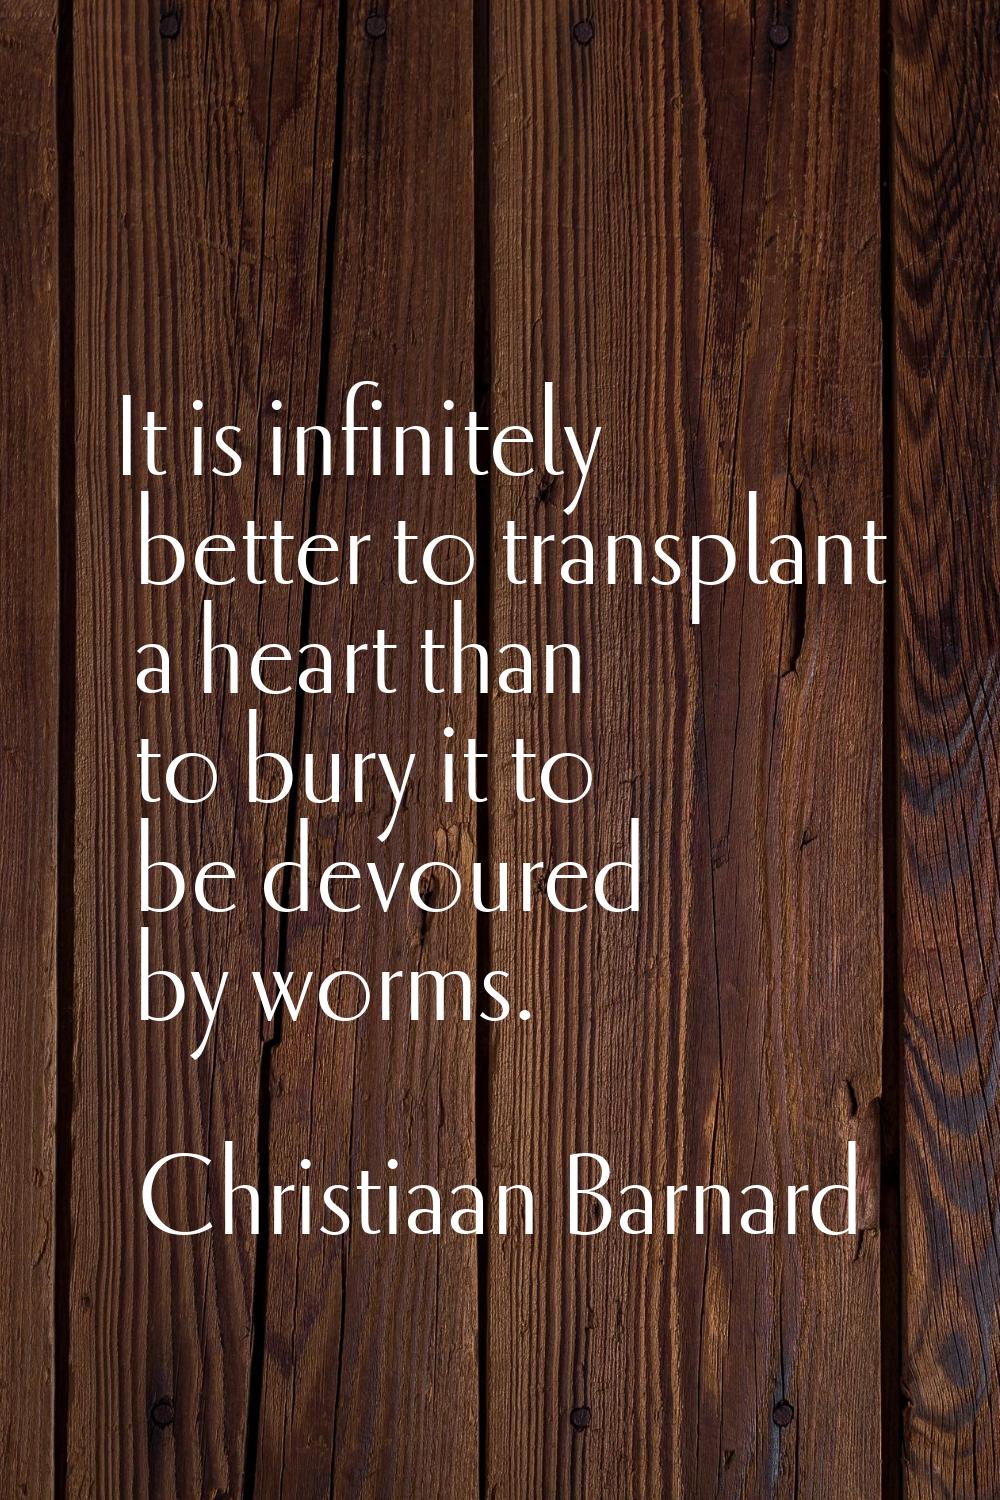 It is infinitely better to transplant a heart than to bury it to be devoured by worms.